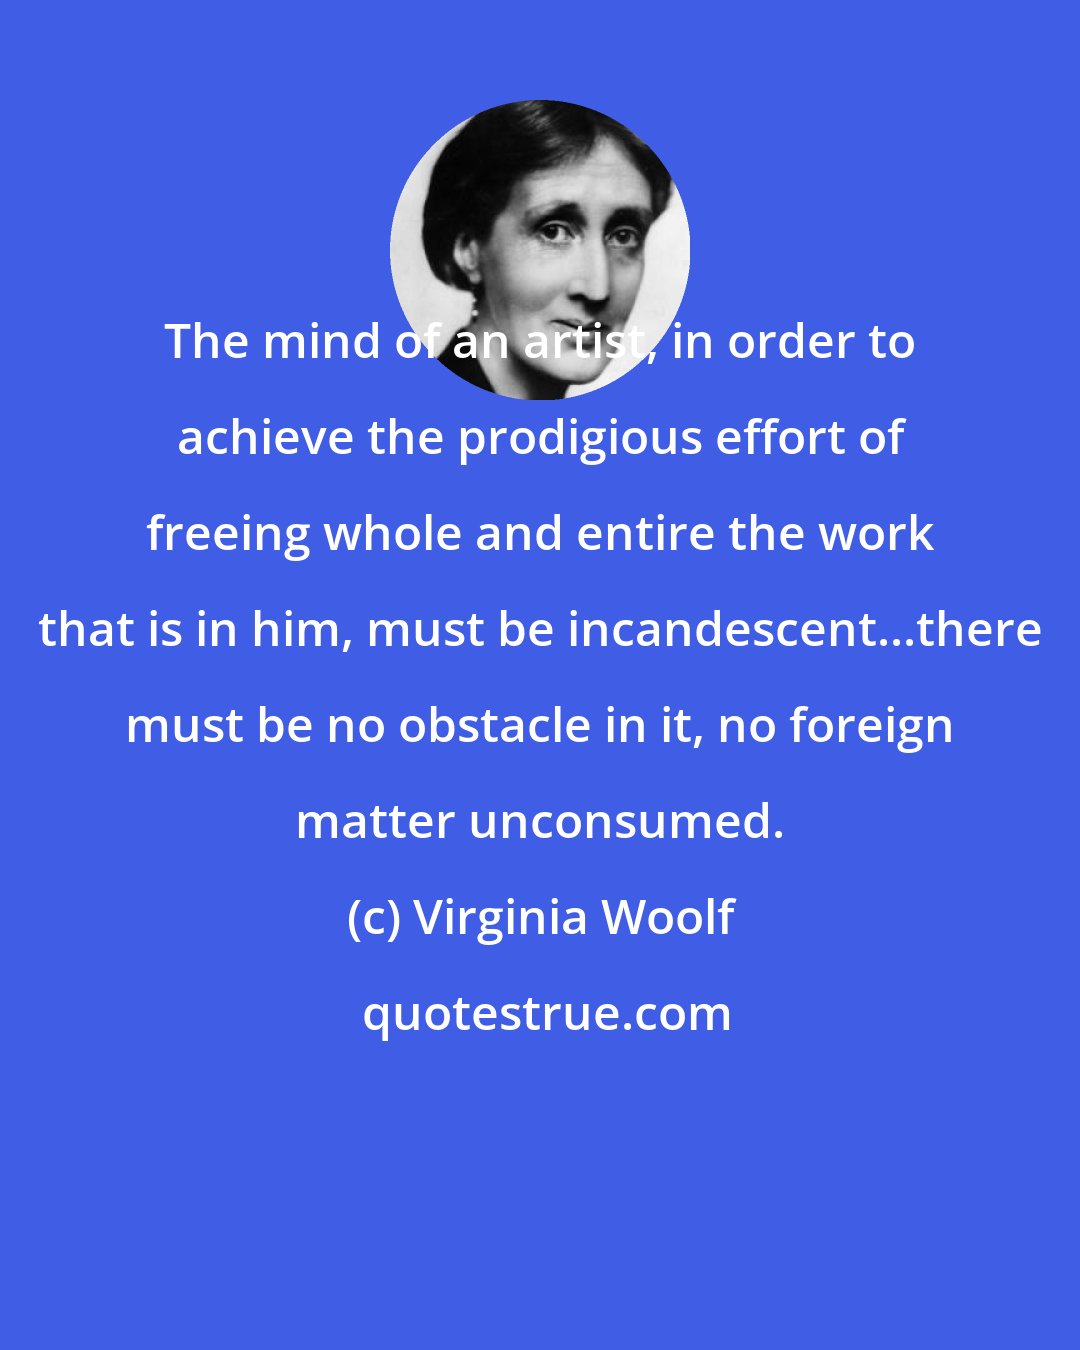 Virginia Woolf: The mind of an artist, in order to achieve the prodigious effort of freeing whole and entire the work that is in him, must be incandescent...there must be no obstacle in it, no foreign matter unconsumed.